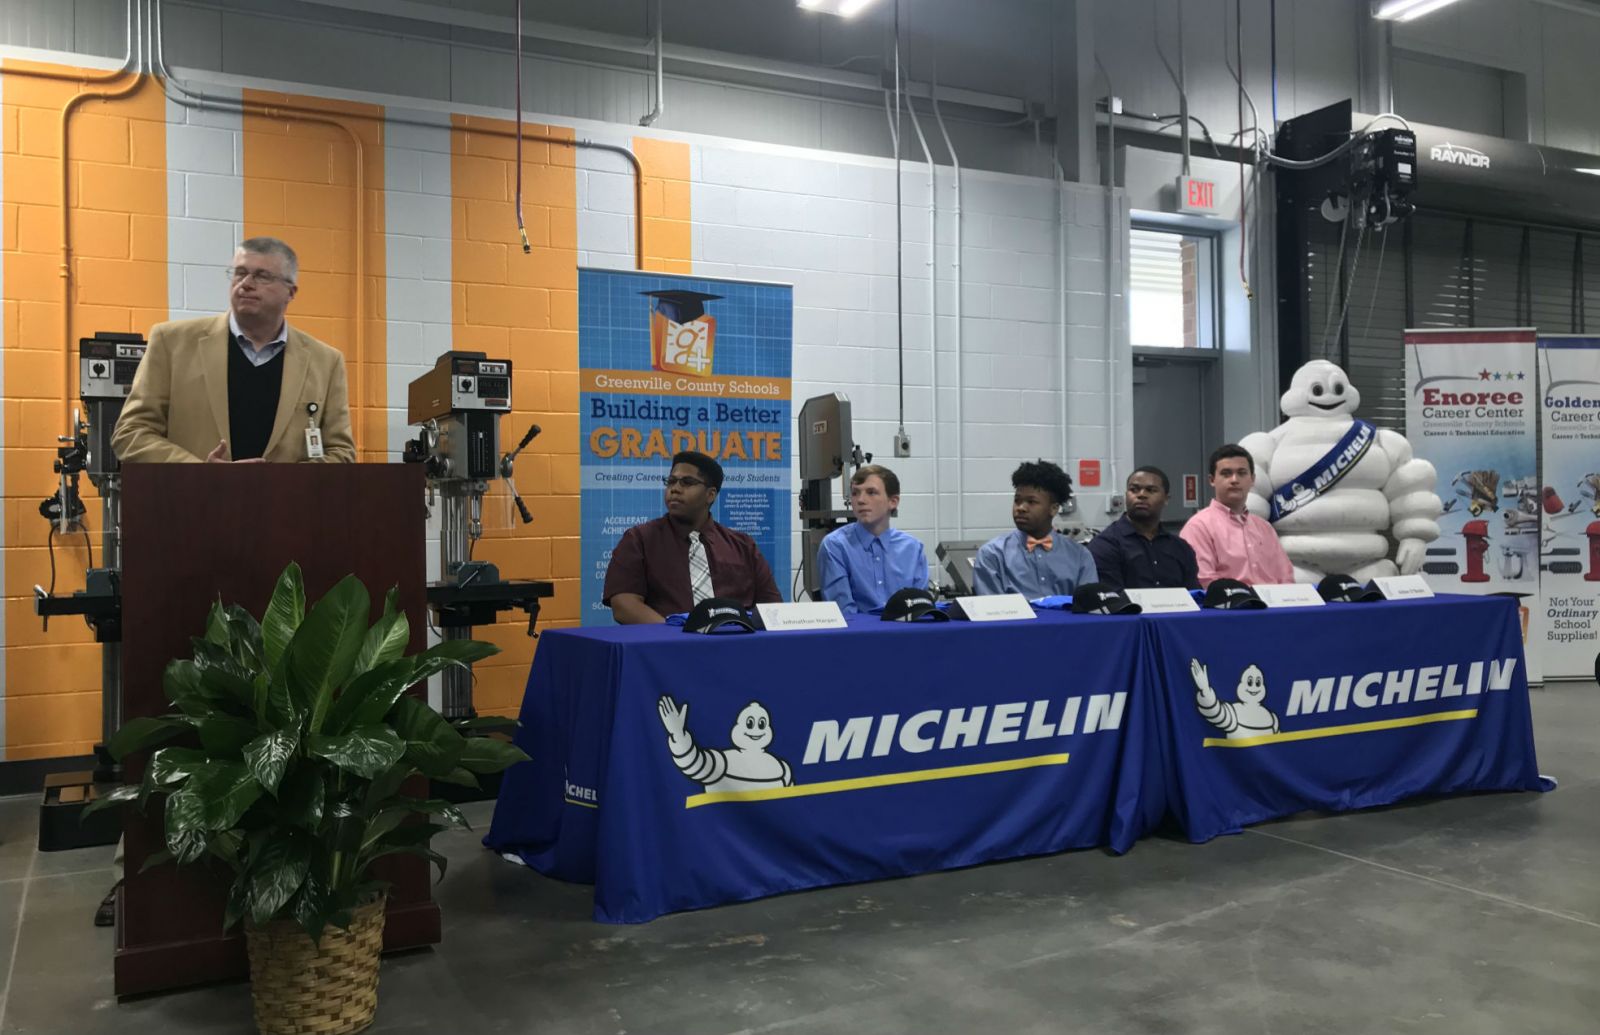 Michelin North America and Greenville County schools partnered for the Michelin Youth Apprenticeship program and held a signing day for the first five apprentices. From left, Burke Royster, superintendent of Greenville County schools, and apprentices Johnathan Harper, Jacob Tucker, Iquavious Lewis, Janias Tinch and Aidan O??Boyle. (Photo/Teresa Cutlip)